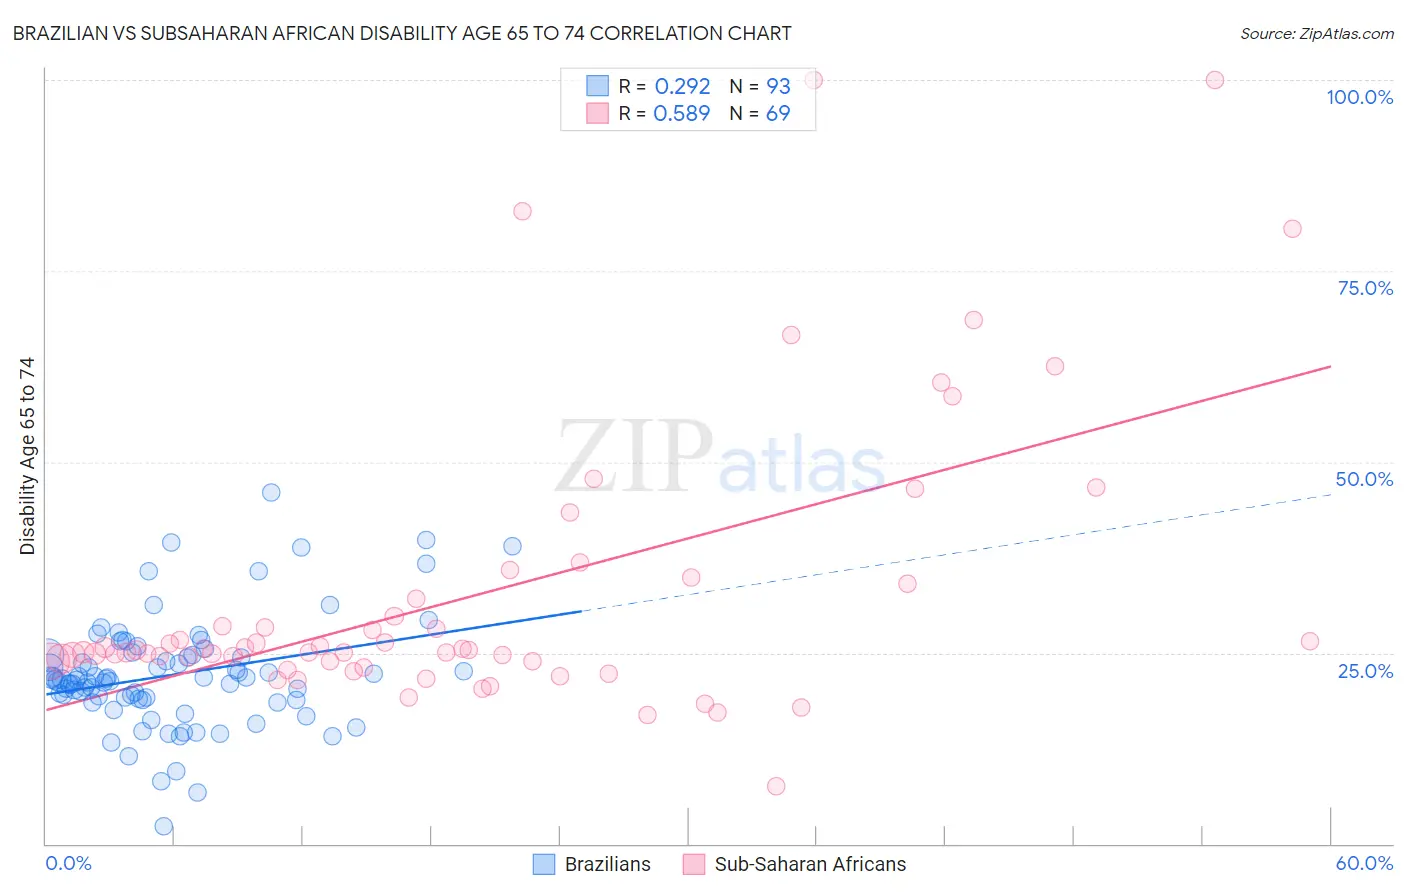 Brazilian vs Subsaharan African Disability Age 65 to 74